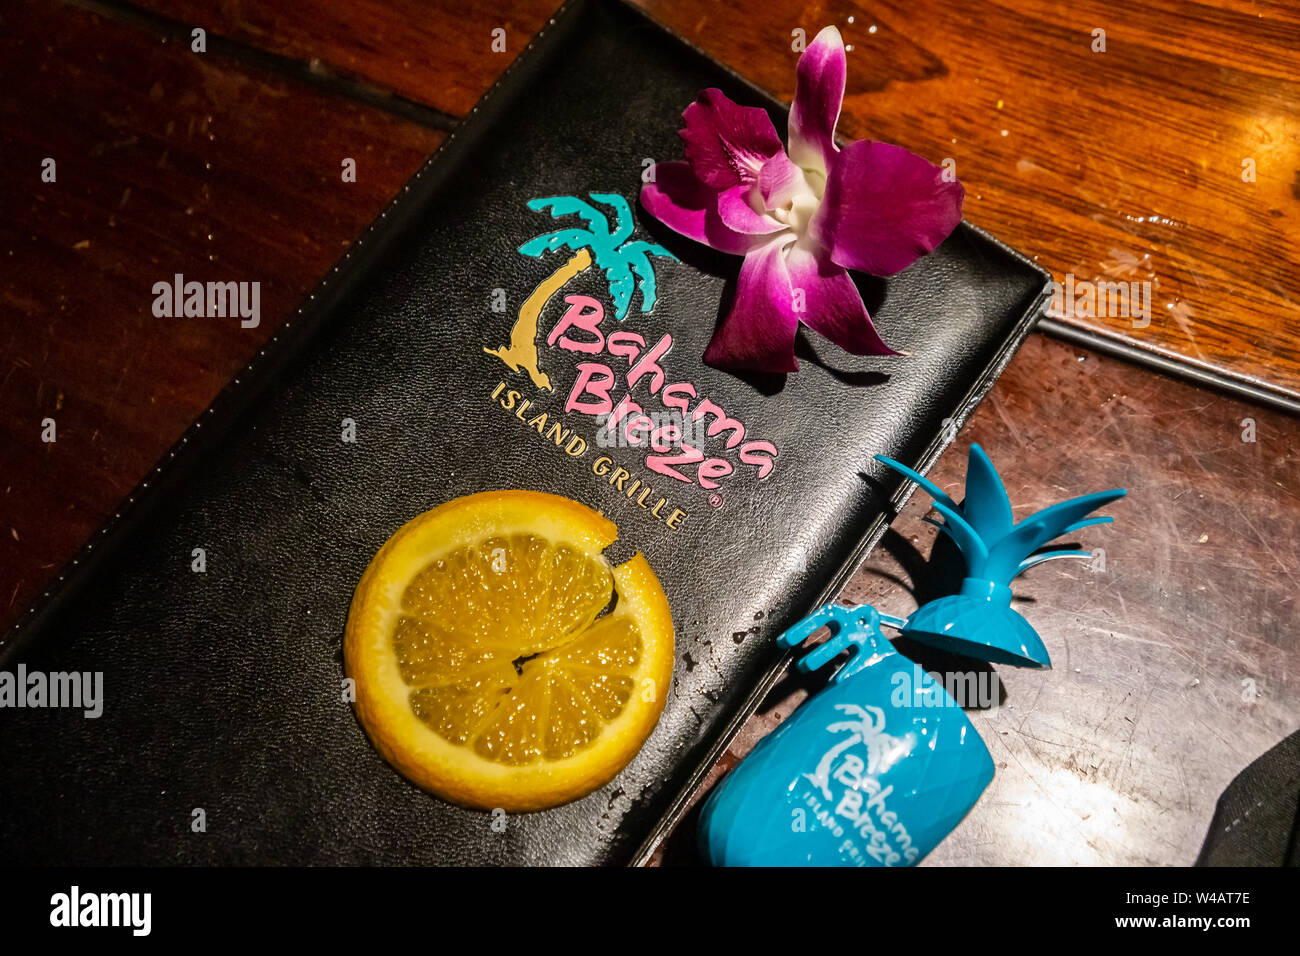 Kennesaw, GA - July 12th 2019: Paying the tab or check at tropical bach island themed American chain restaurant Bahama Breeze. Part of Darden restaura Stock Photo